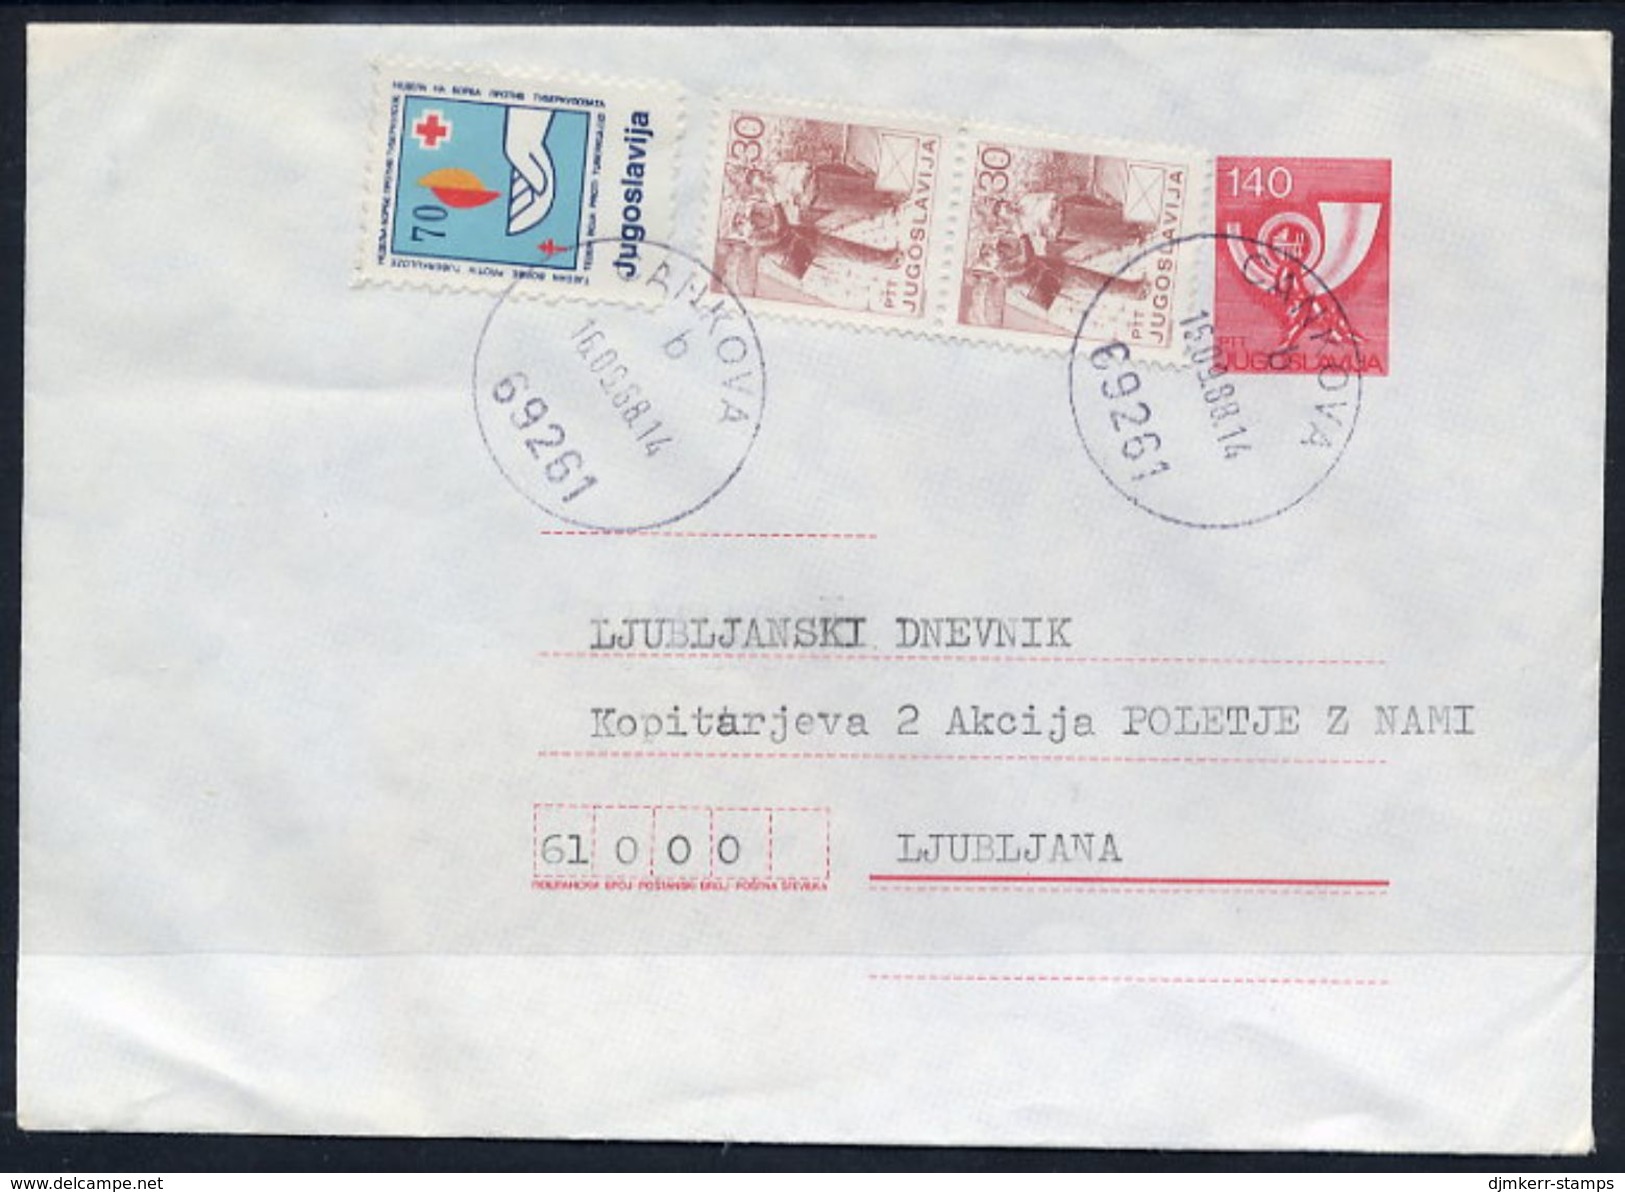 YUGOSLAVIA 1988 Posthorn 140 D.stationery Envelope Used With Additional Franking And TB Week Tax.  Michel U81 - Ganzsachen